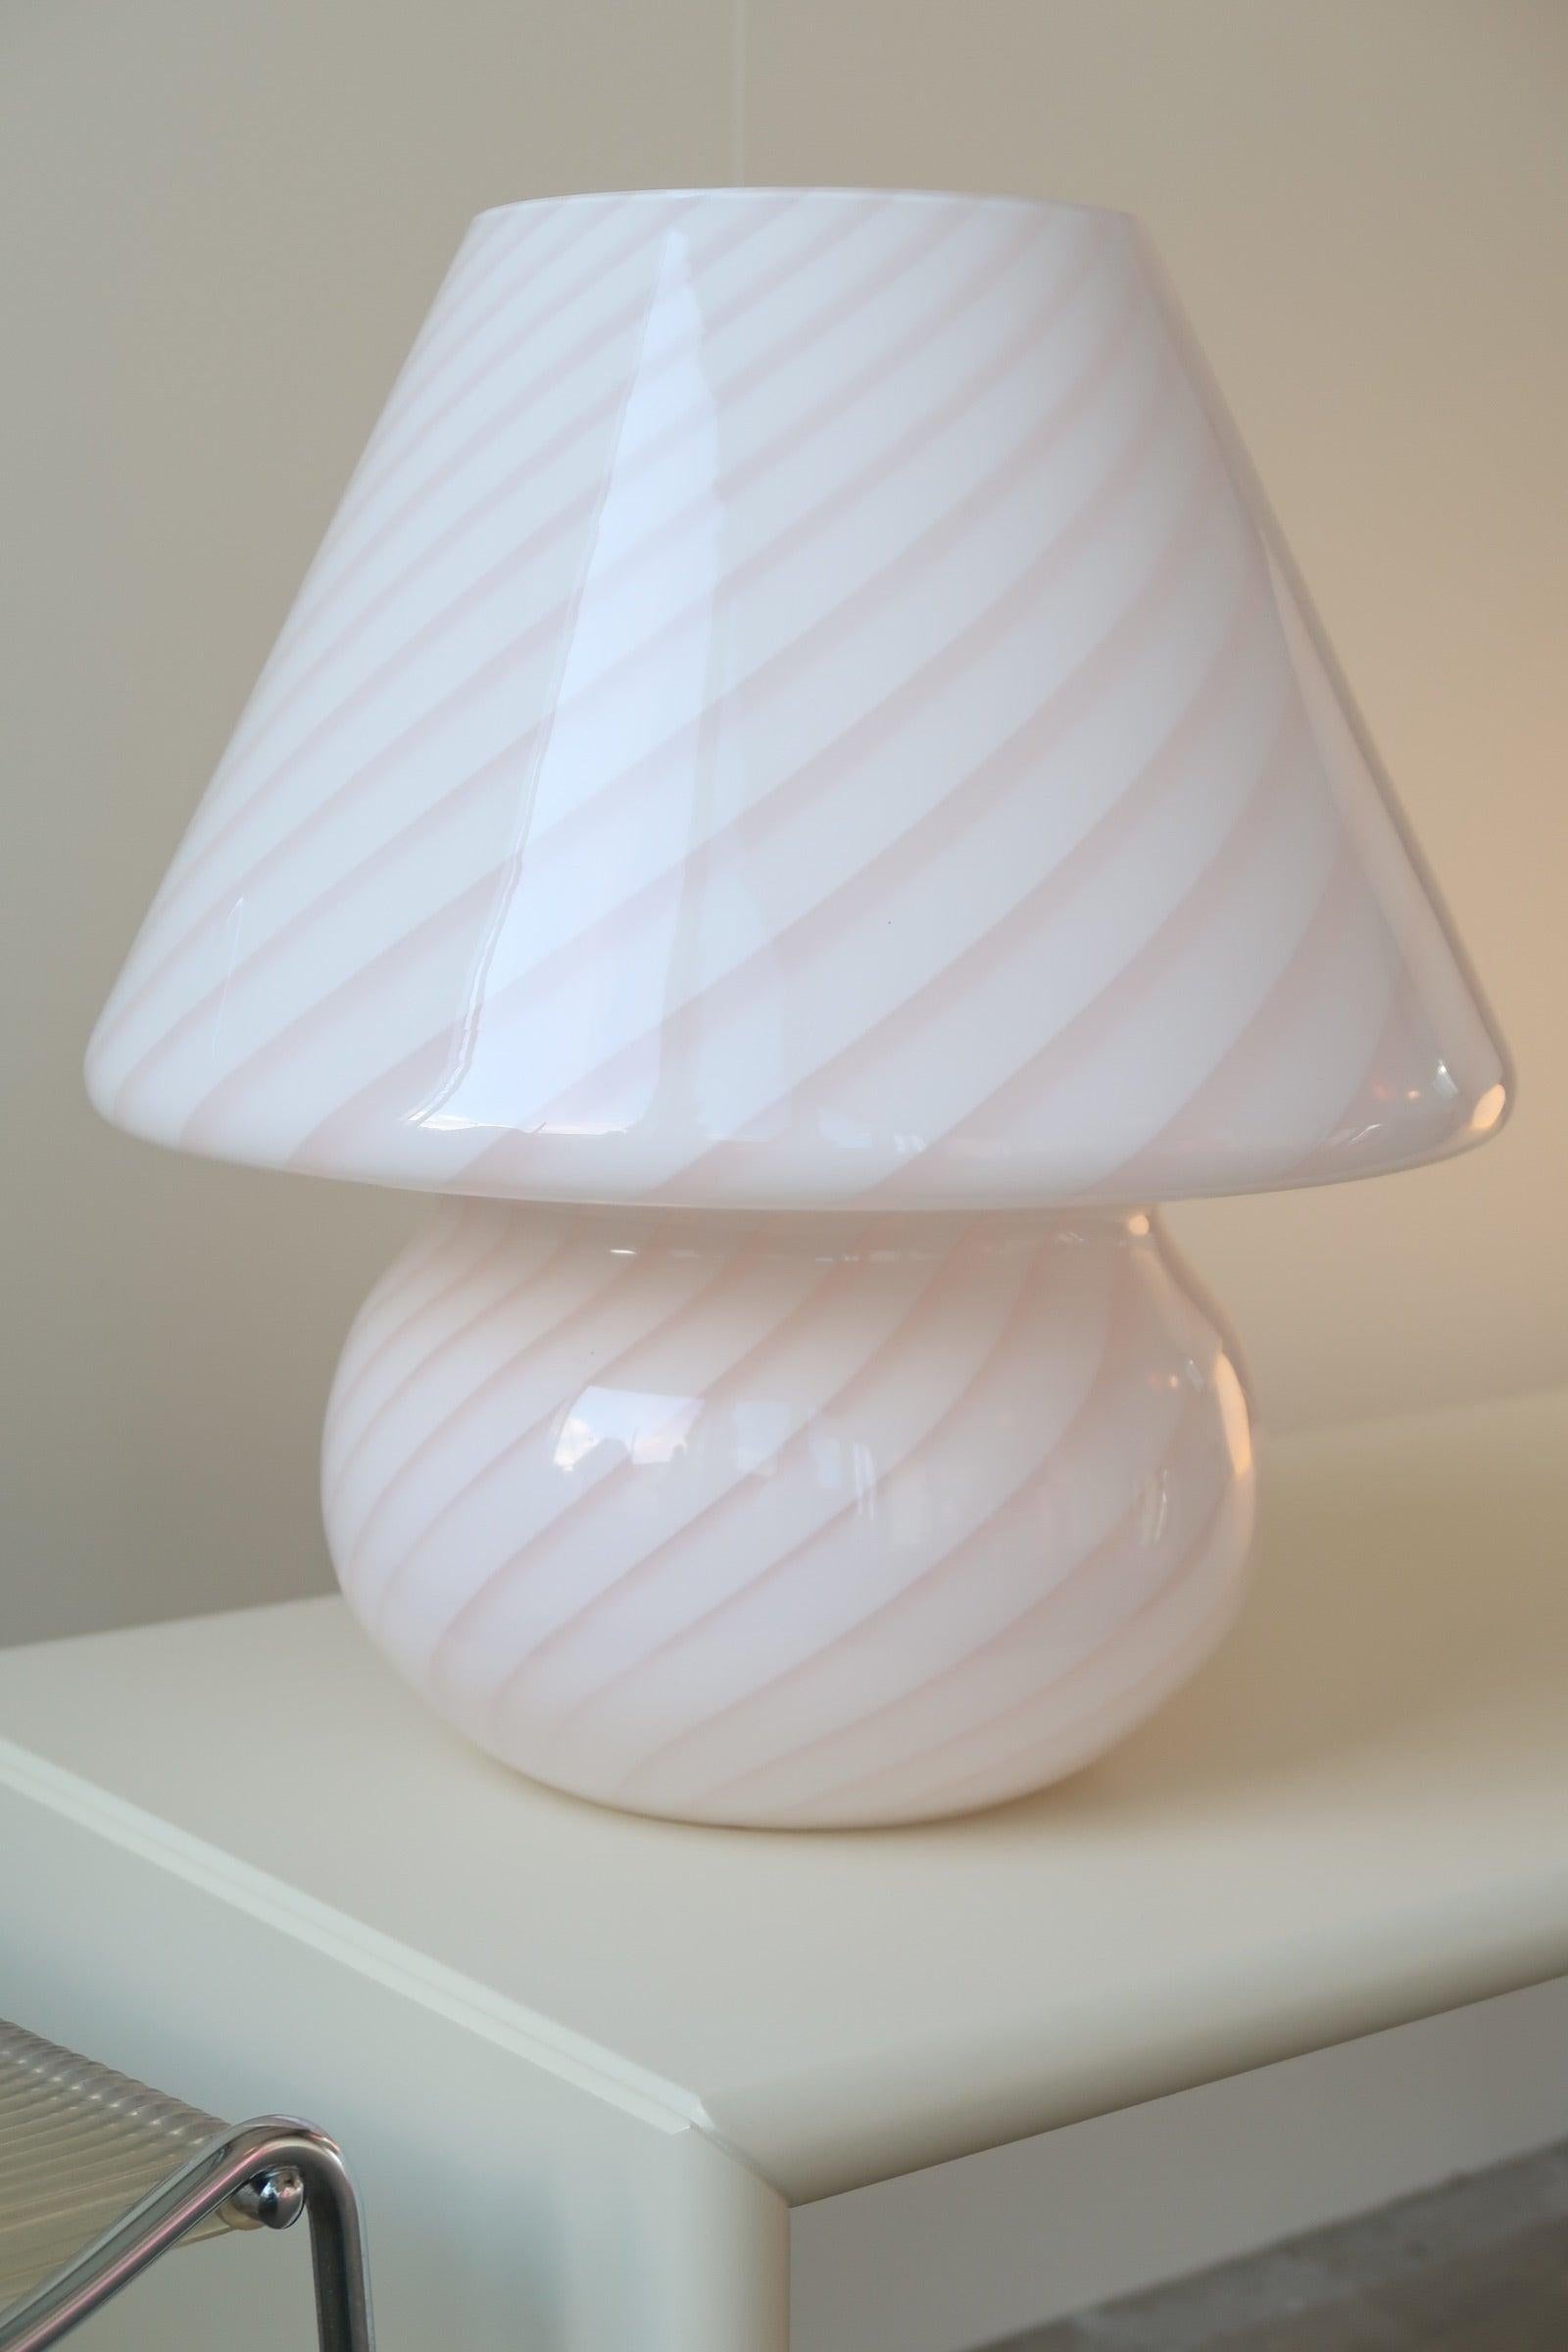 Large vintage Murano mushroom table lamp in a beautiful soft pink shade. Mouth-blown in one piece of glass with a swirl pattern. Handmade in Italy, 1970s. H: 40 cm